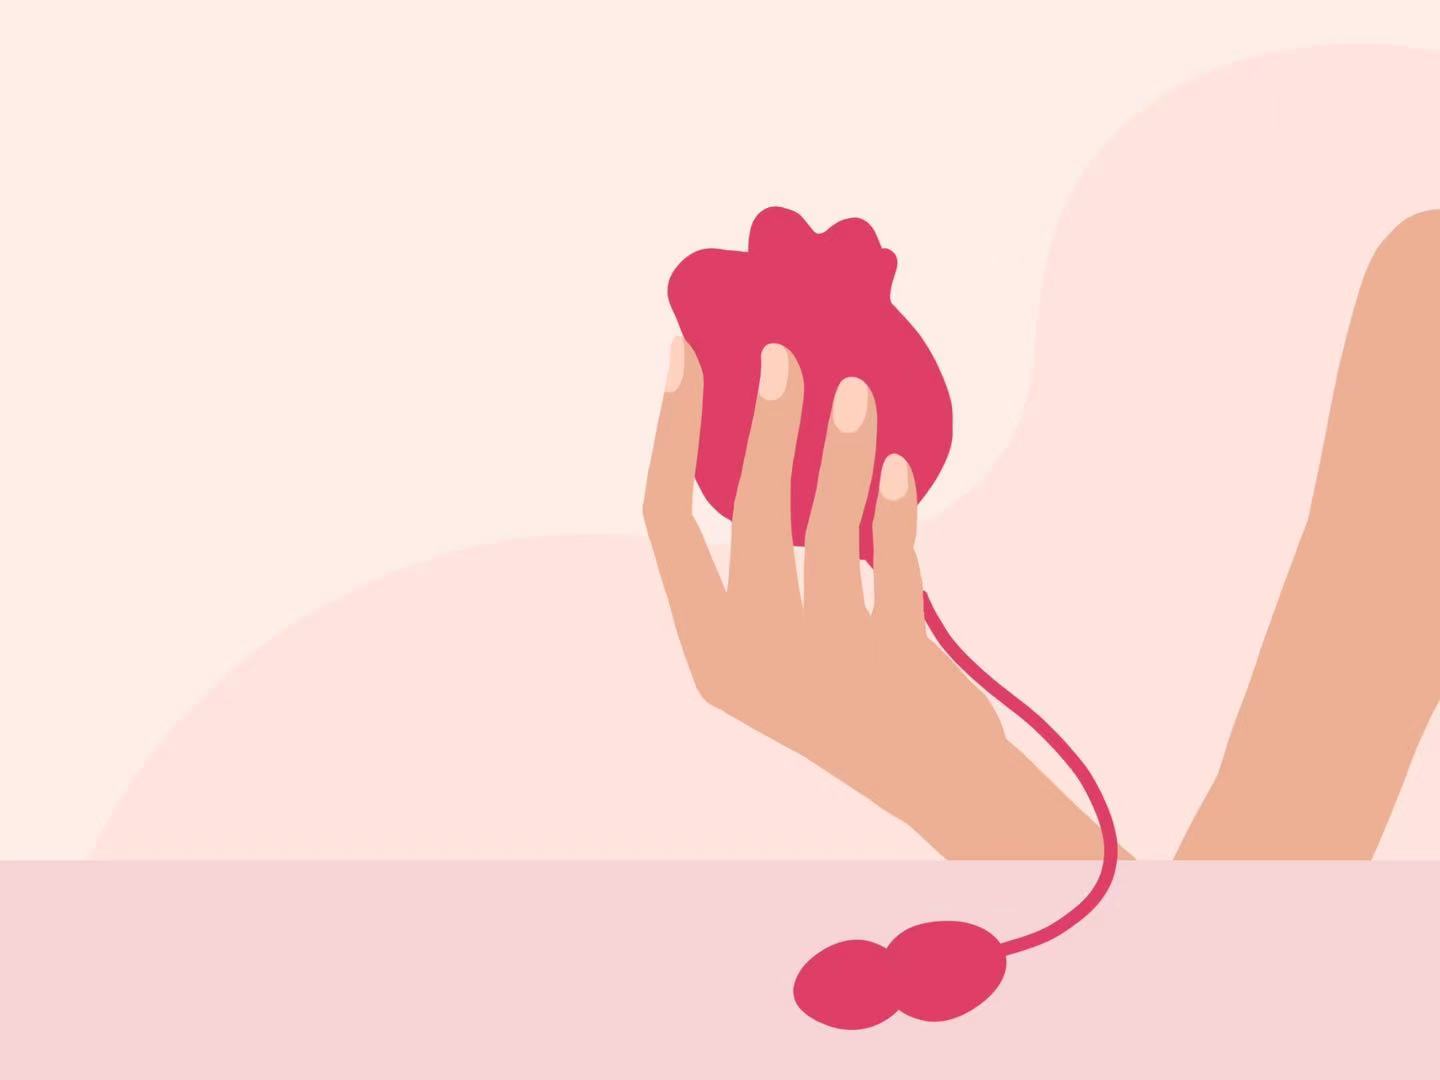 How to use the rose vibrator correctly